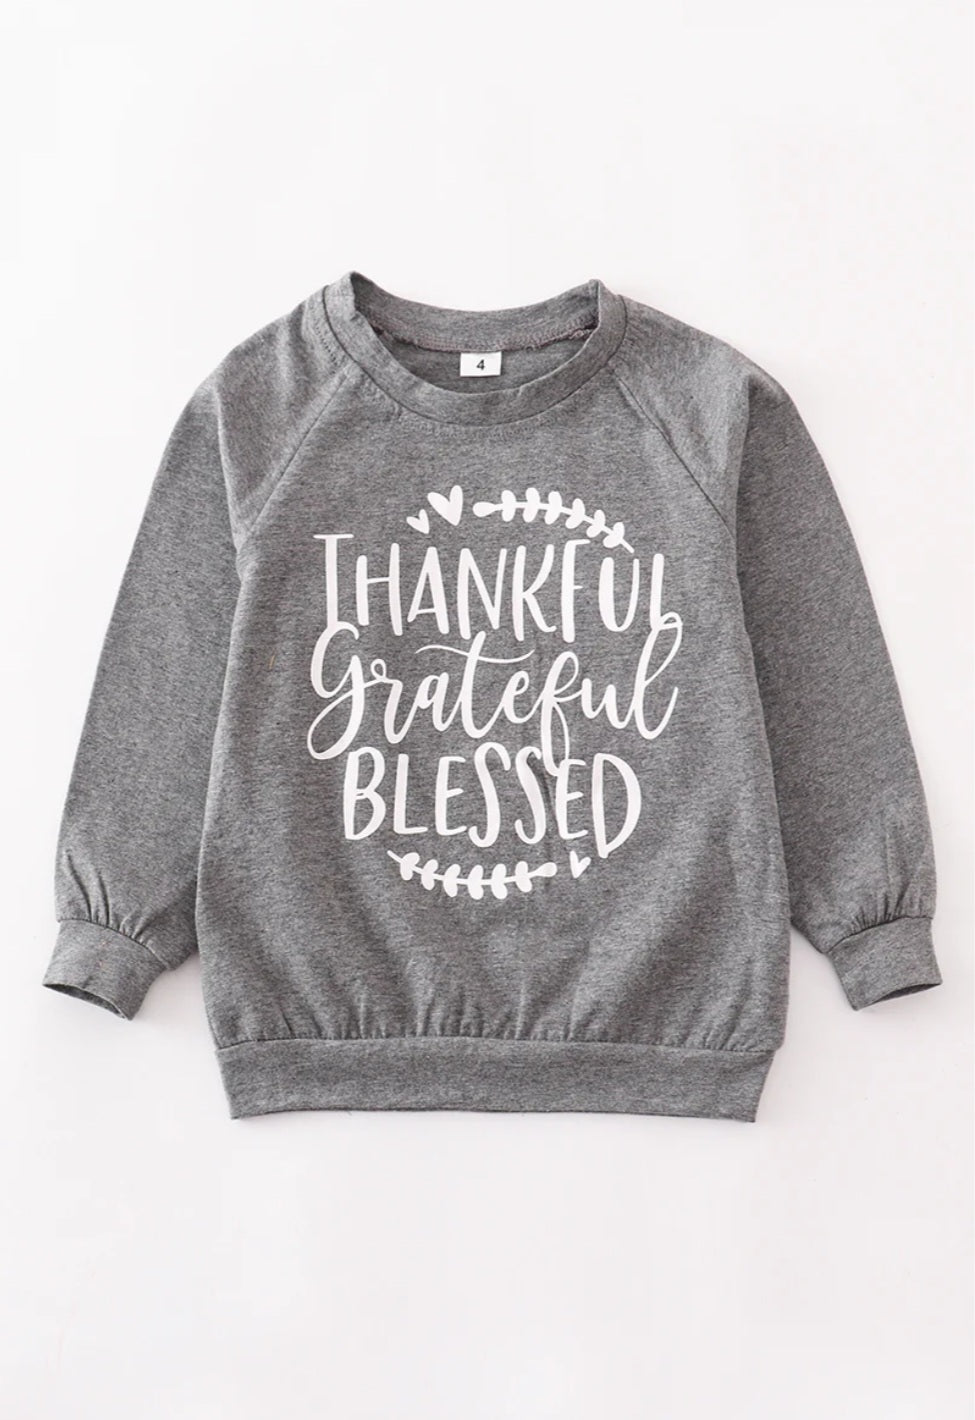 Thankful, Greatful, & Blessed Shirt